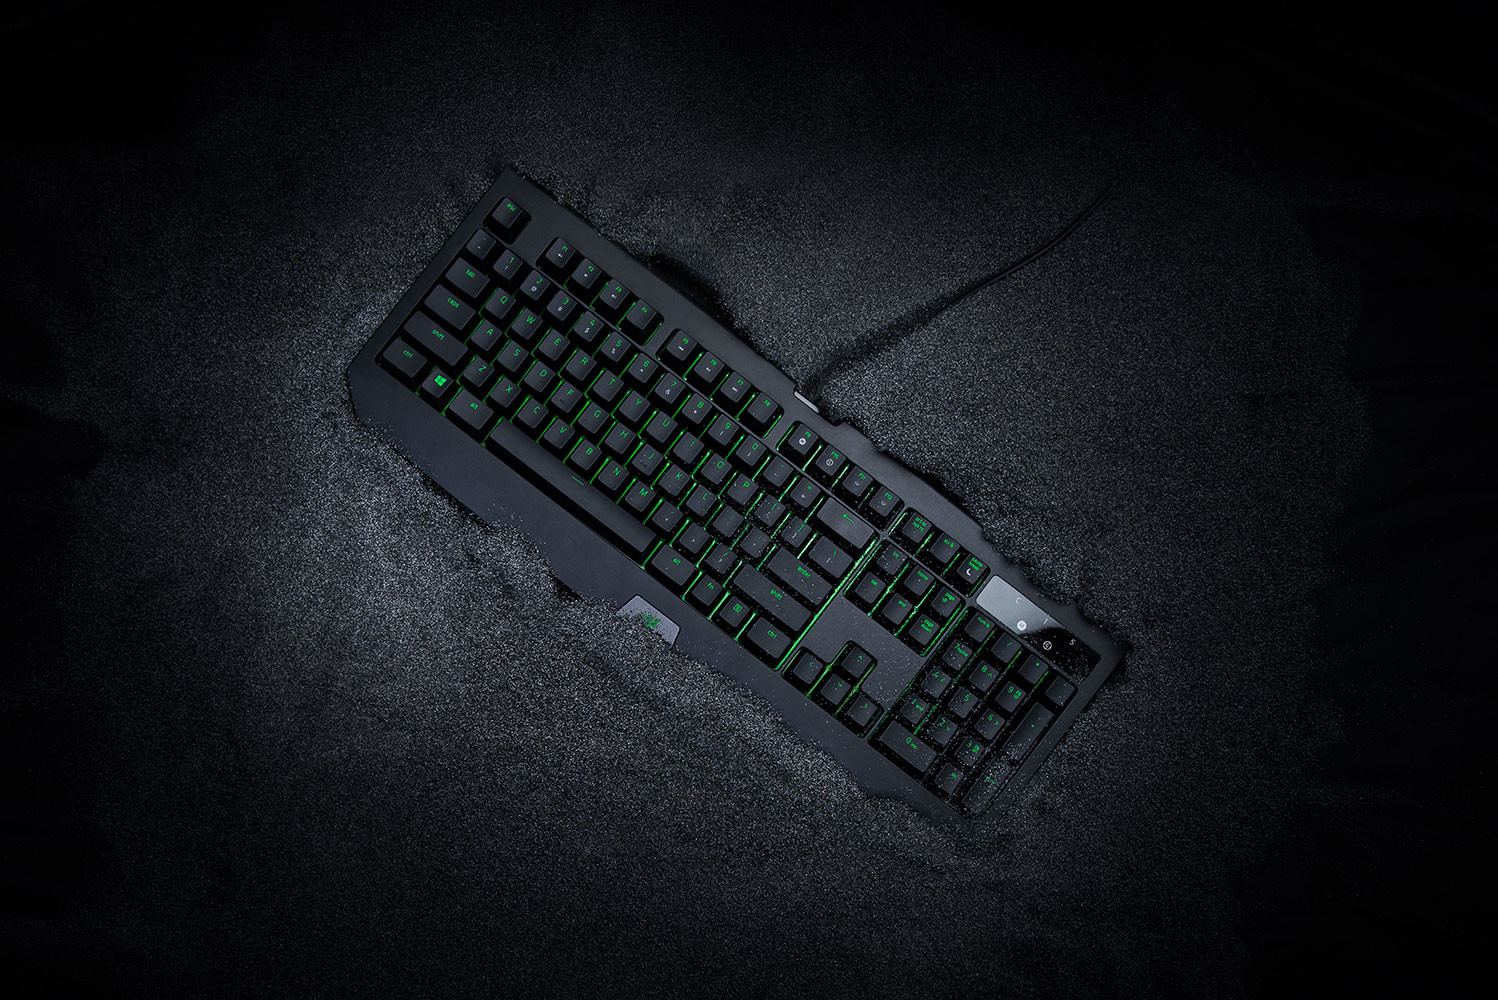 Razer Upgrades the BlackWidow Ultimate with Water and Dust Resistant